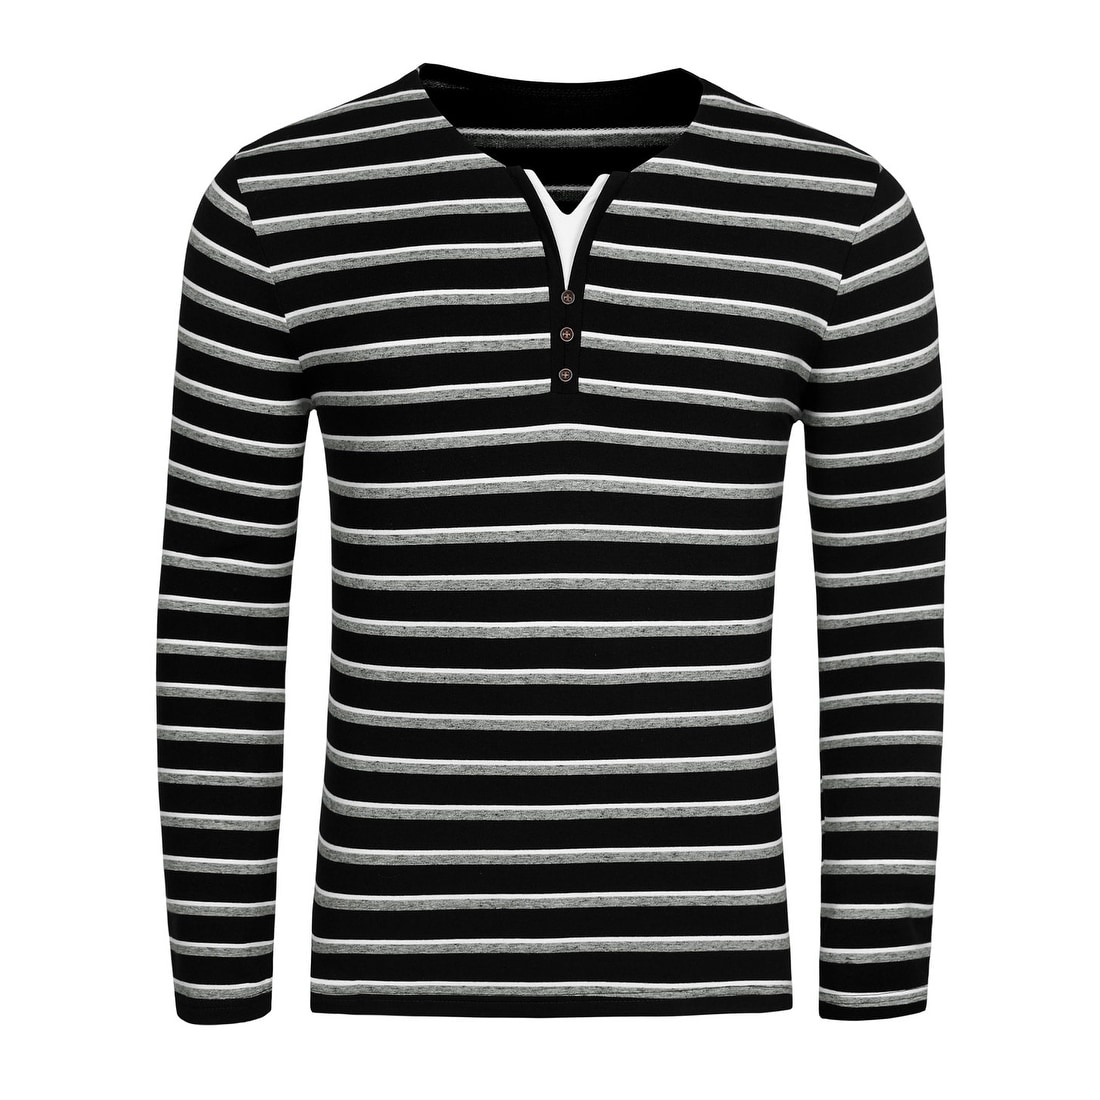 mens black and white striped shirt long sleeve